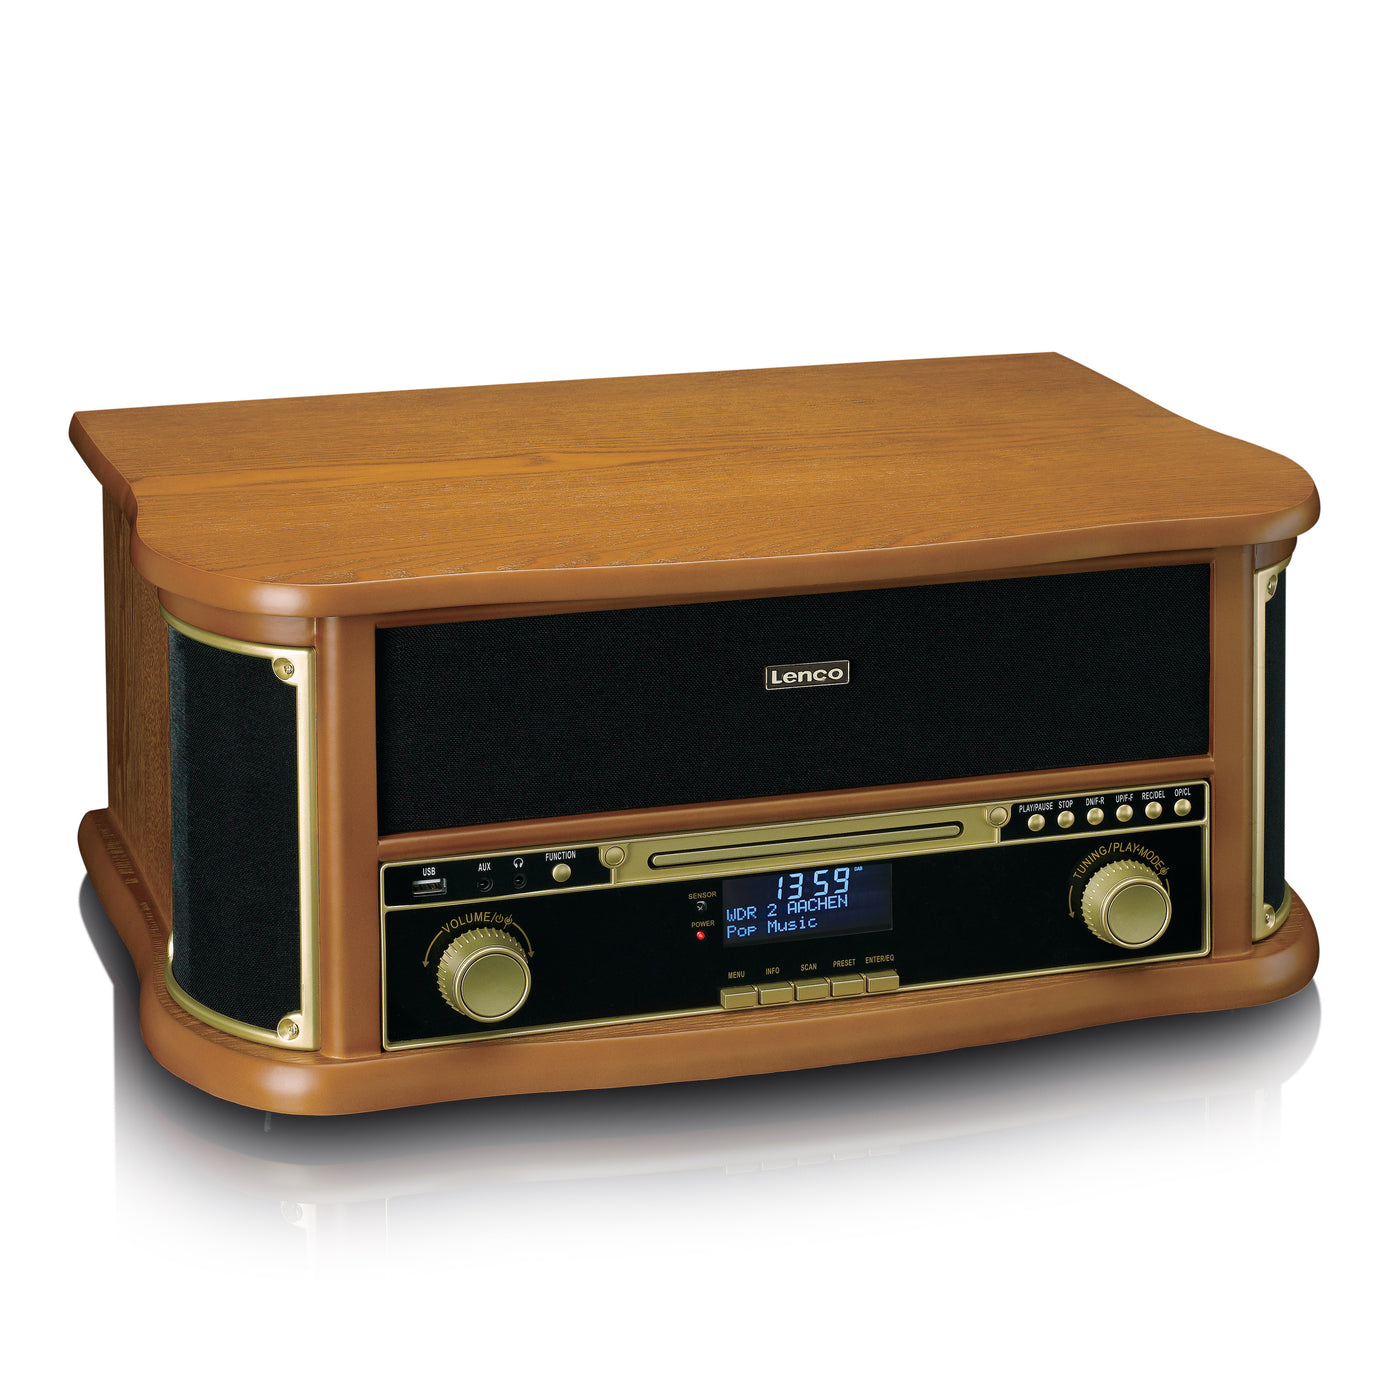 CLASSIC PHONO TCD-2571WD - Wooden retro turntable with Bluetooth®, DAB+/FM radio, USB encoding, CD player, cassette player, and built-in speakers - Wood